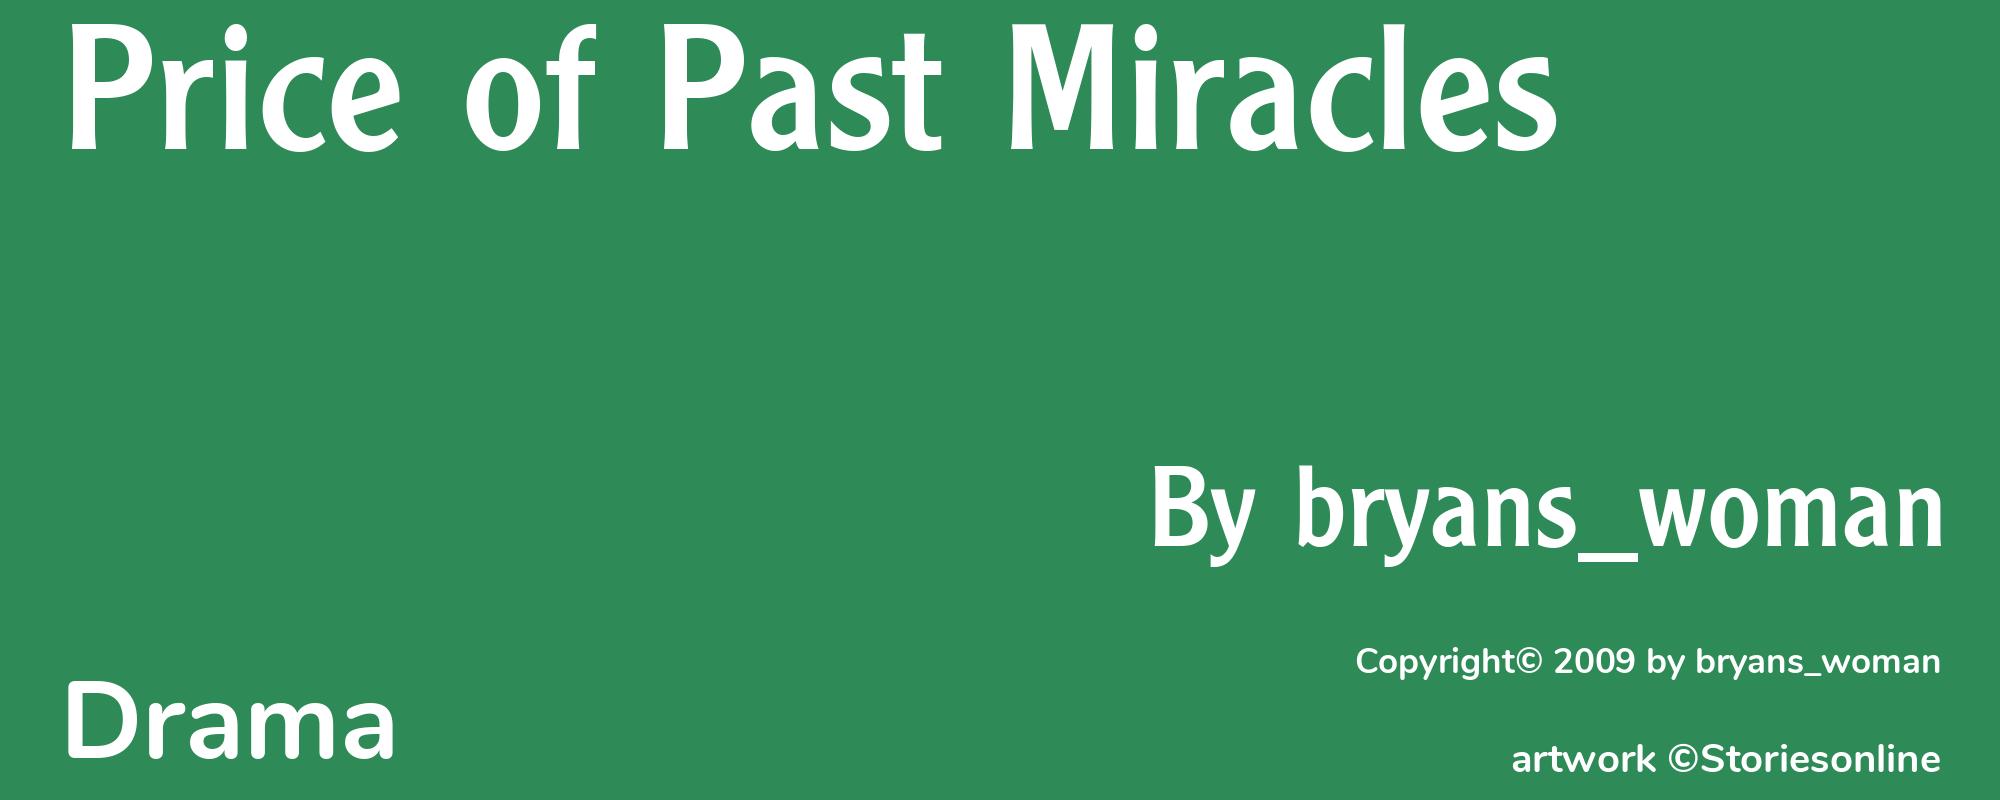 Price of Past Miracles - Cover